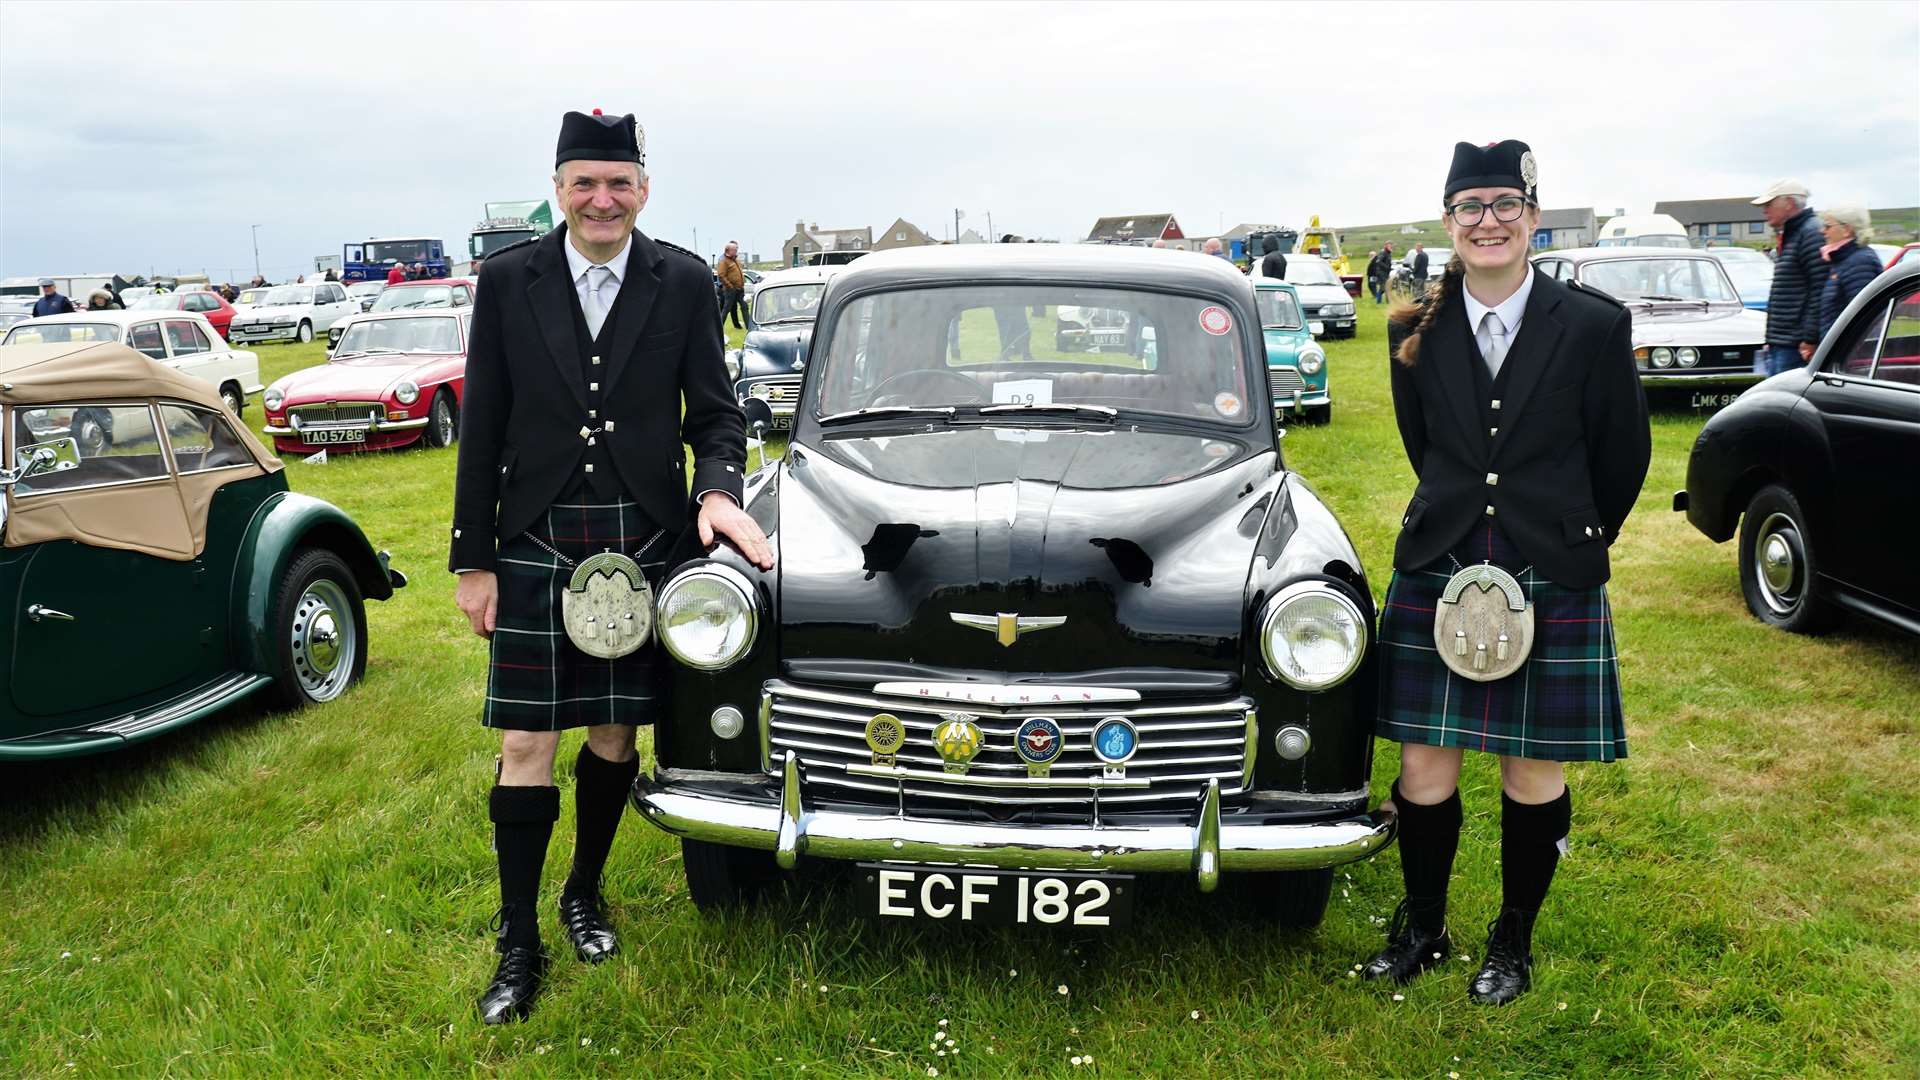 Gordon Tait and his daughter Shona who both played in the pipe band at the event. Shona recently graduated with distinction in engineering and Gordon was showing his off his 1952 Hillman Minx Mark V. Picture: DGS